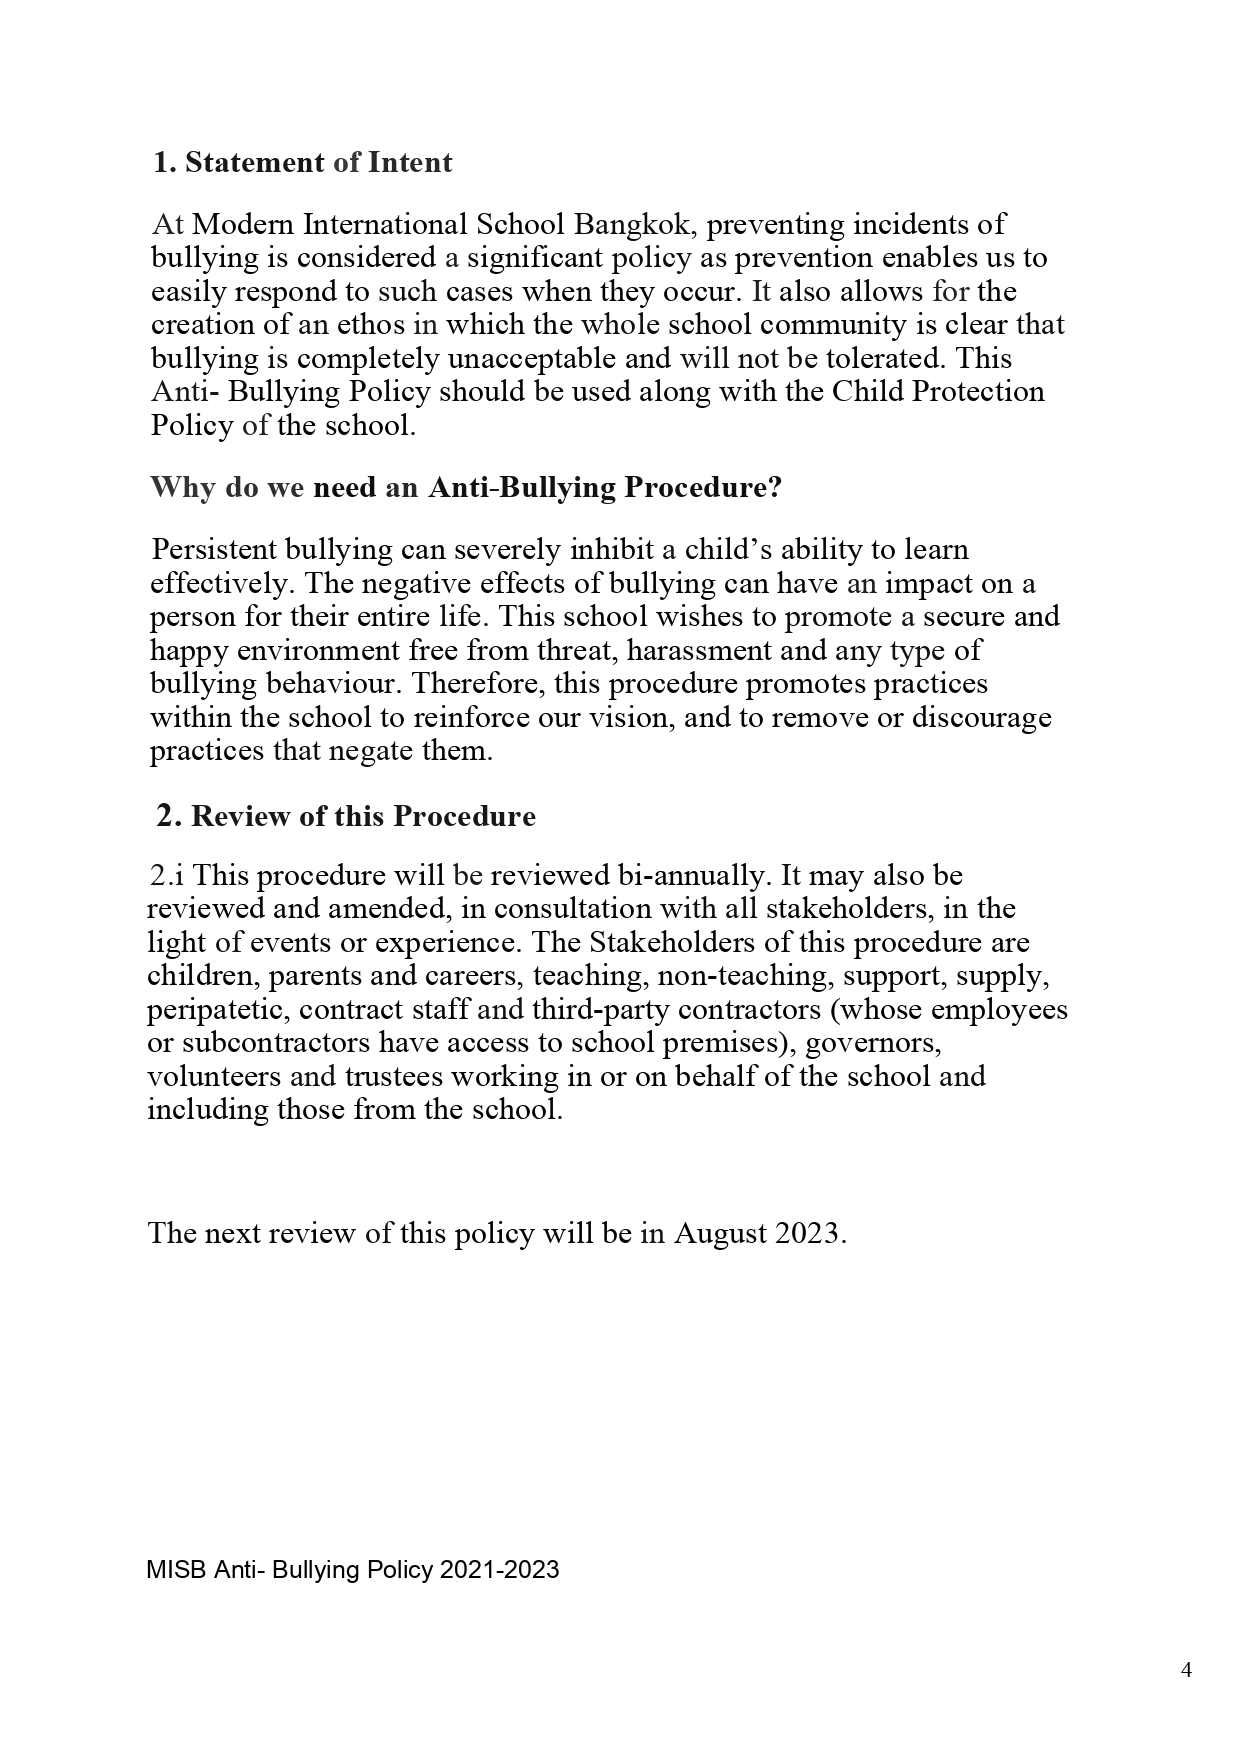 ANTI BULLYING POLICY 2021 2023 New page 0004